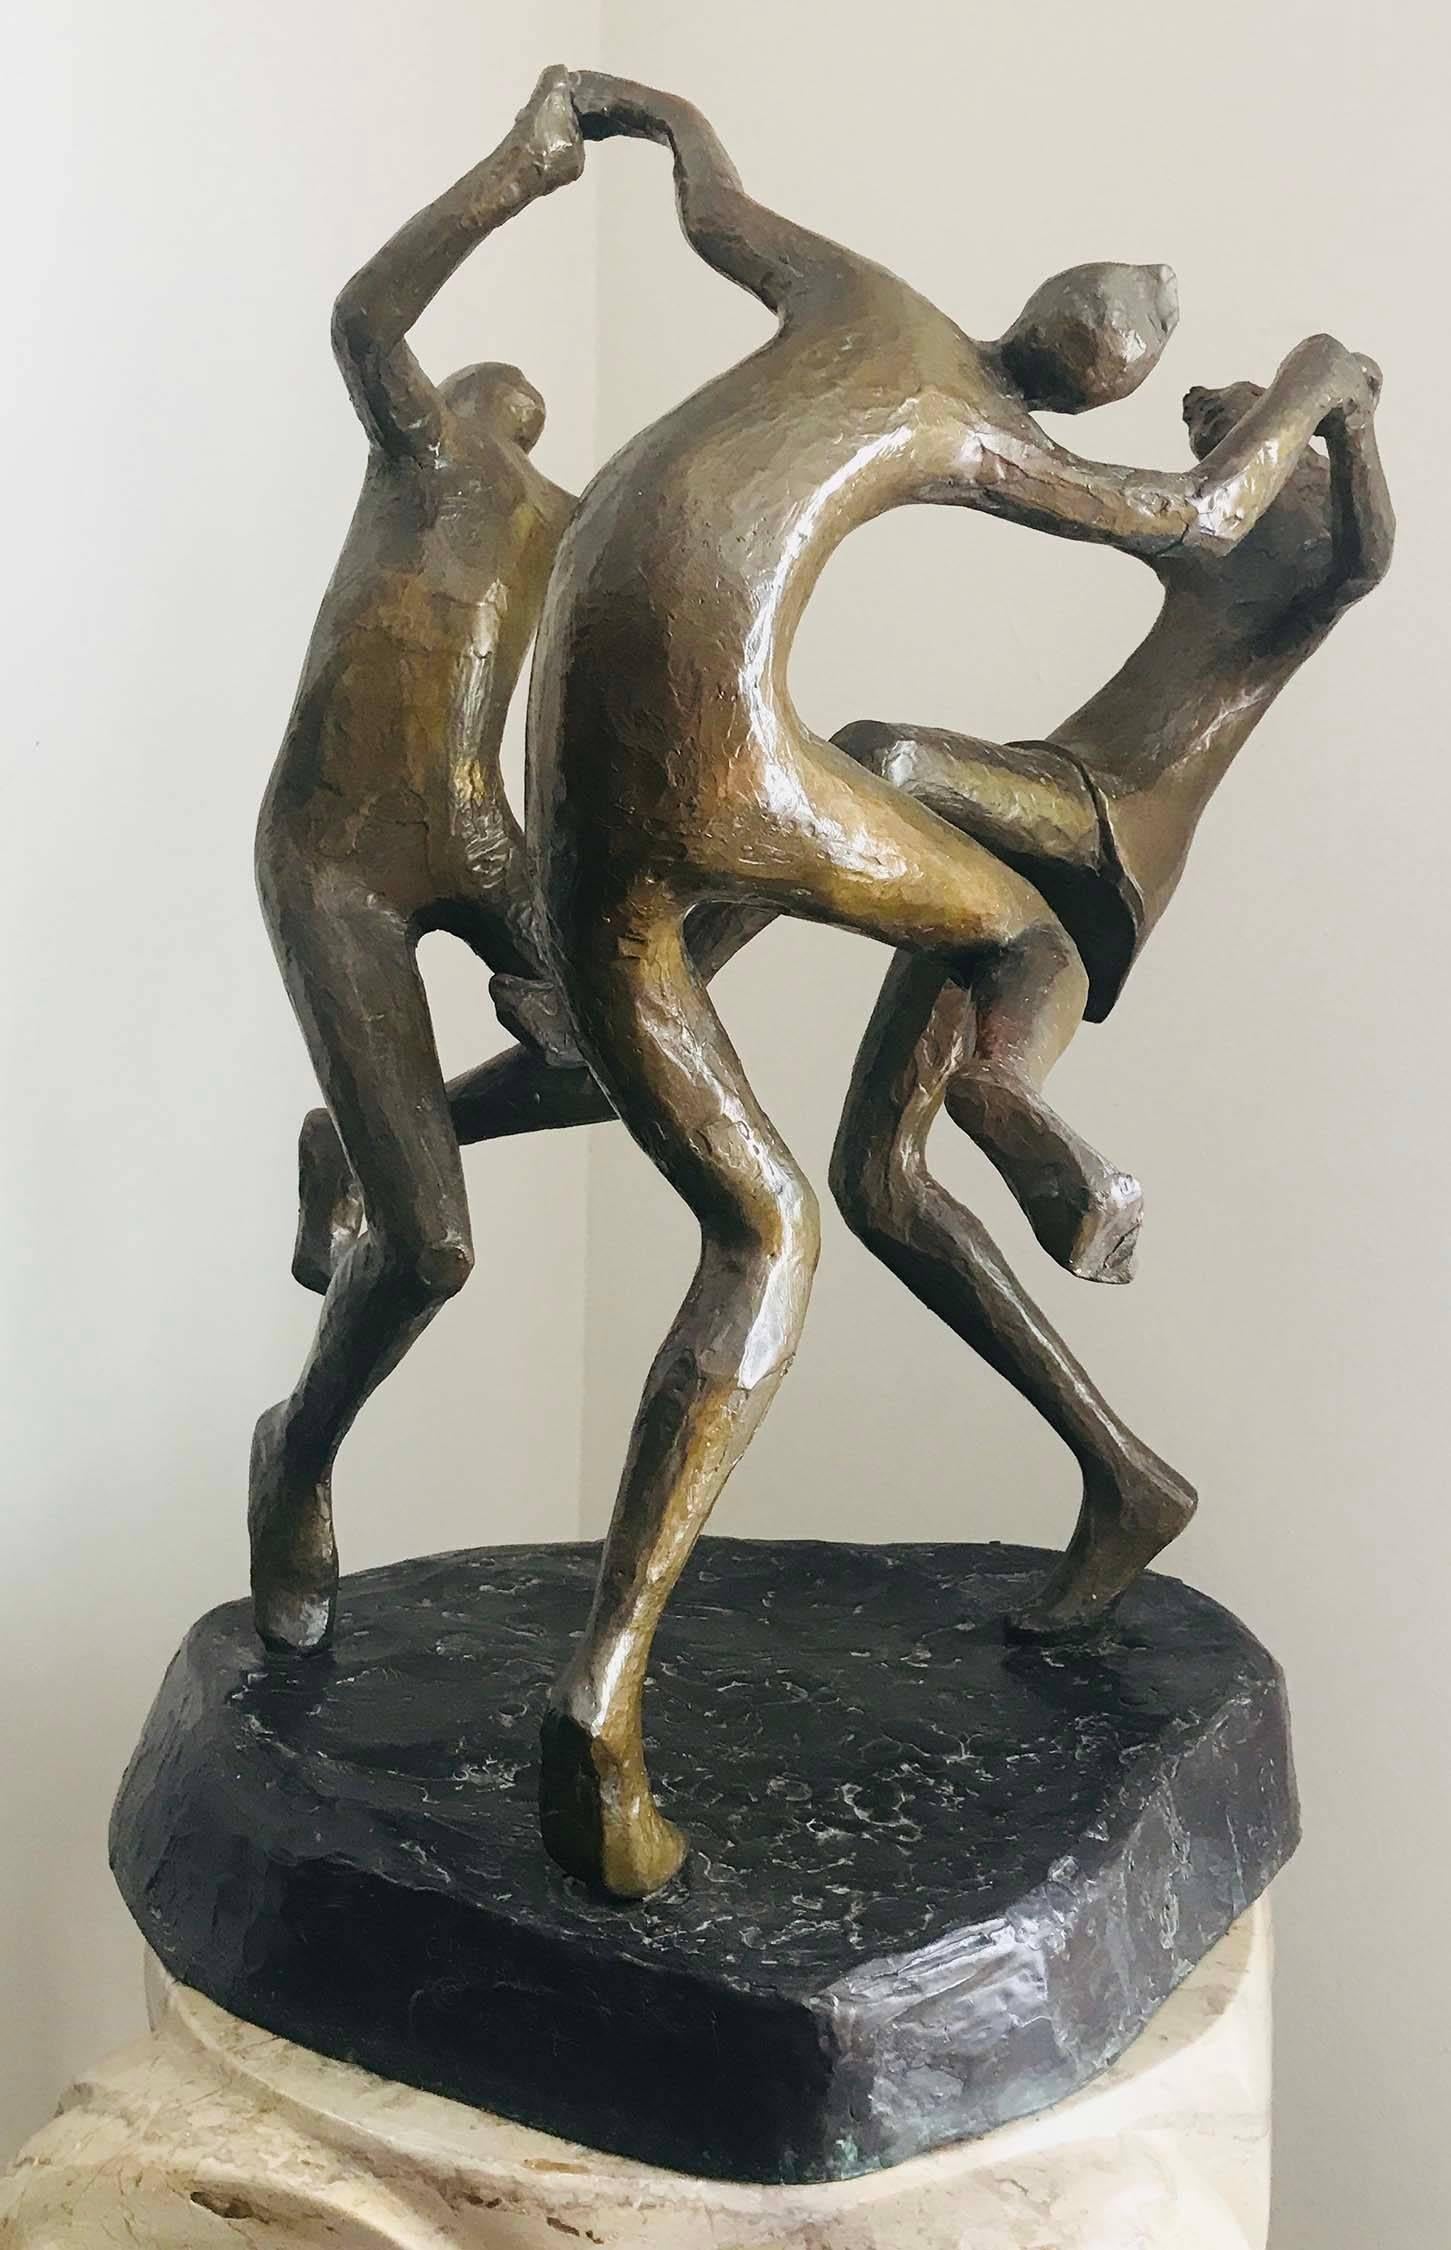 Dancers of Joy - Sculpture by Charna Rickey